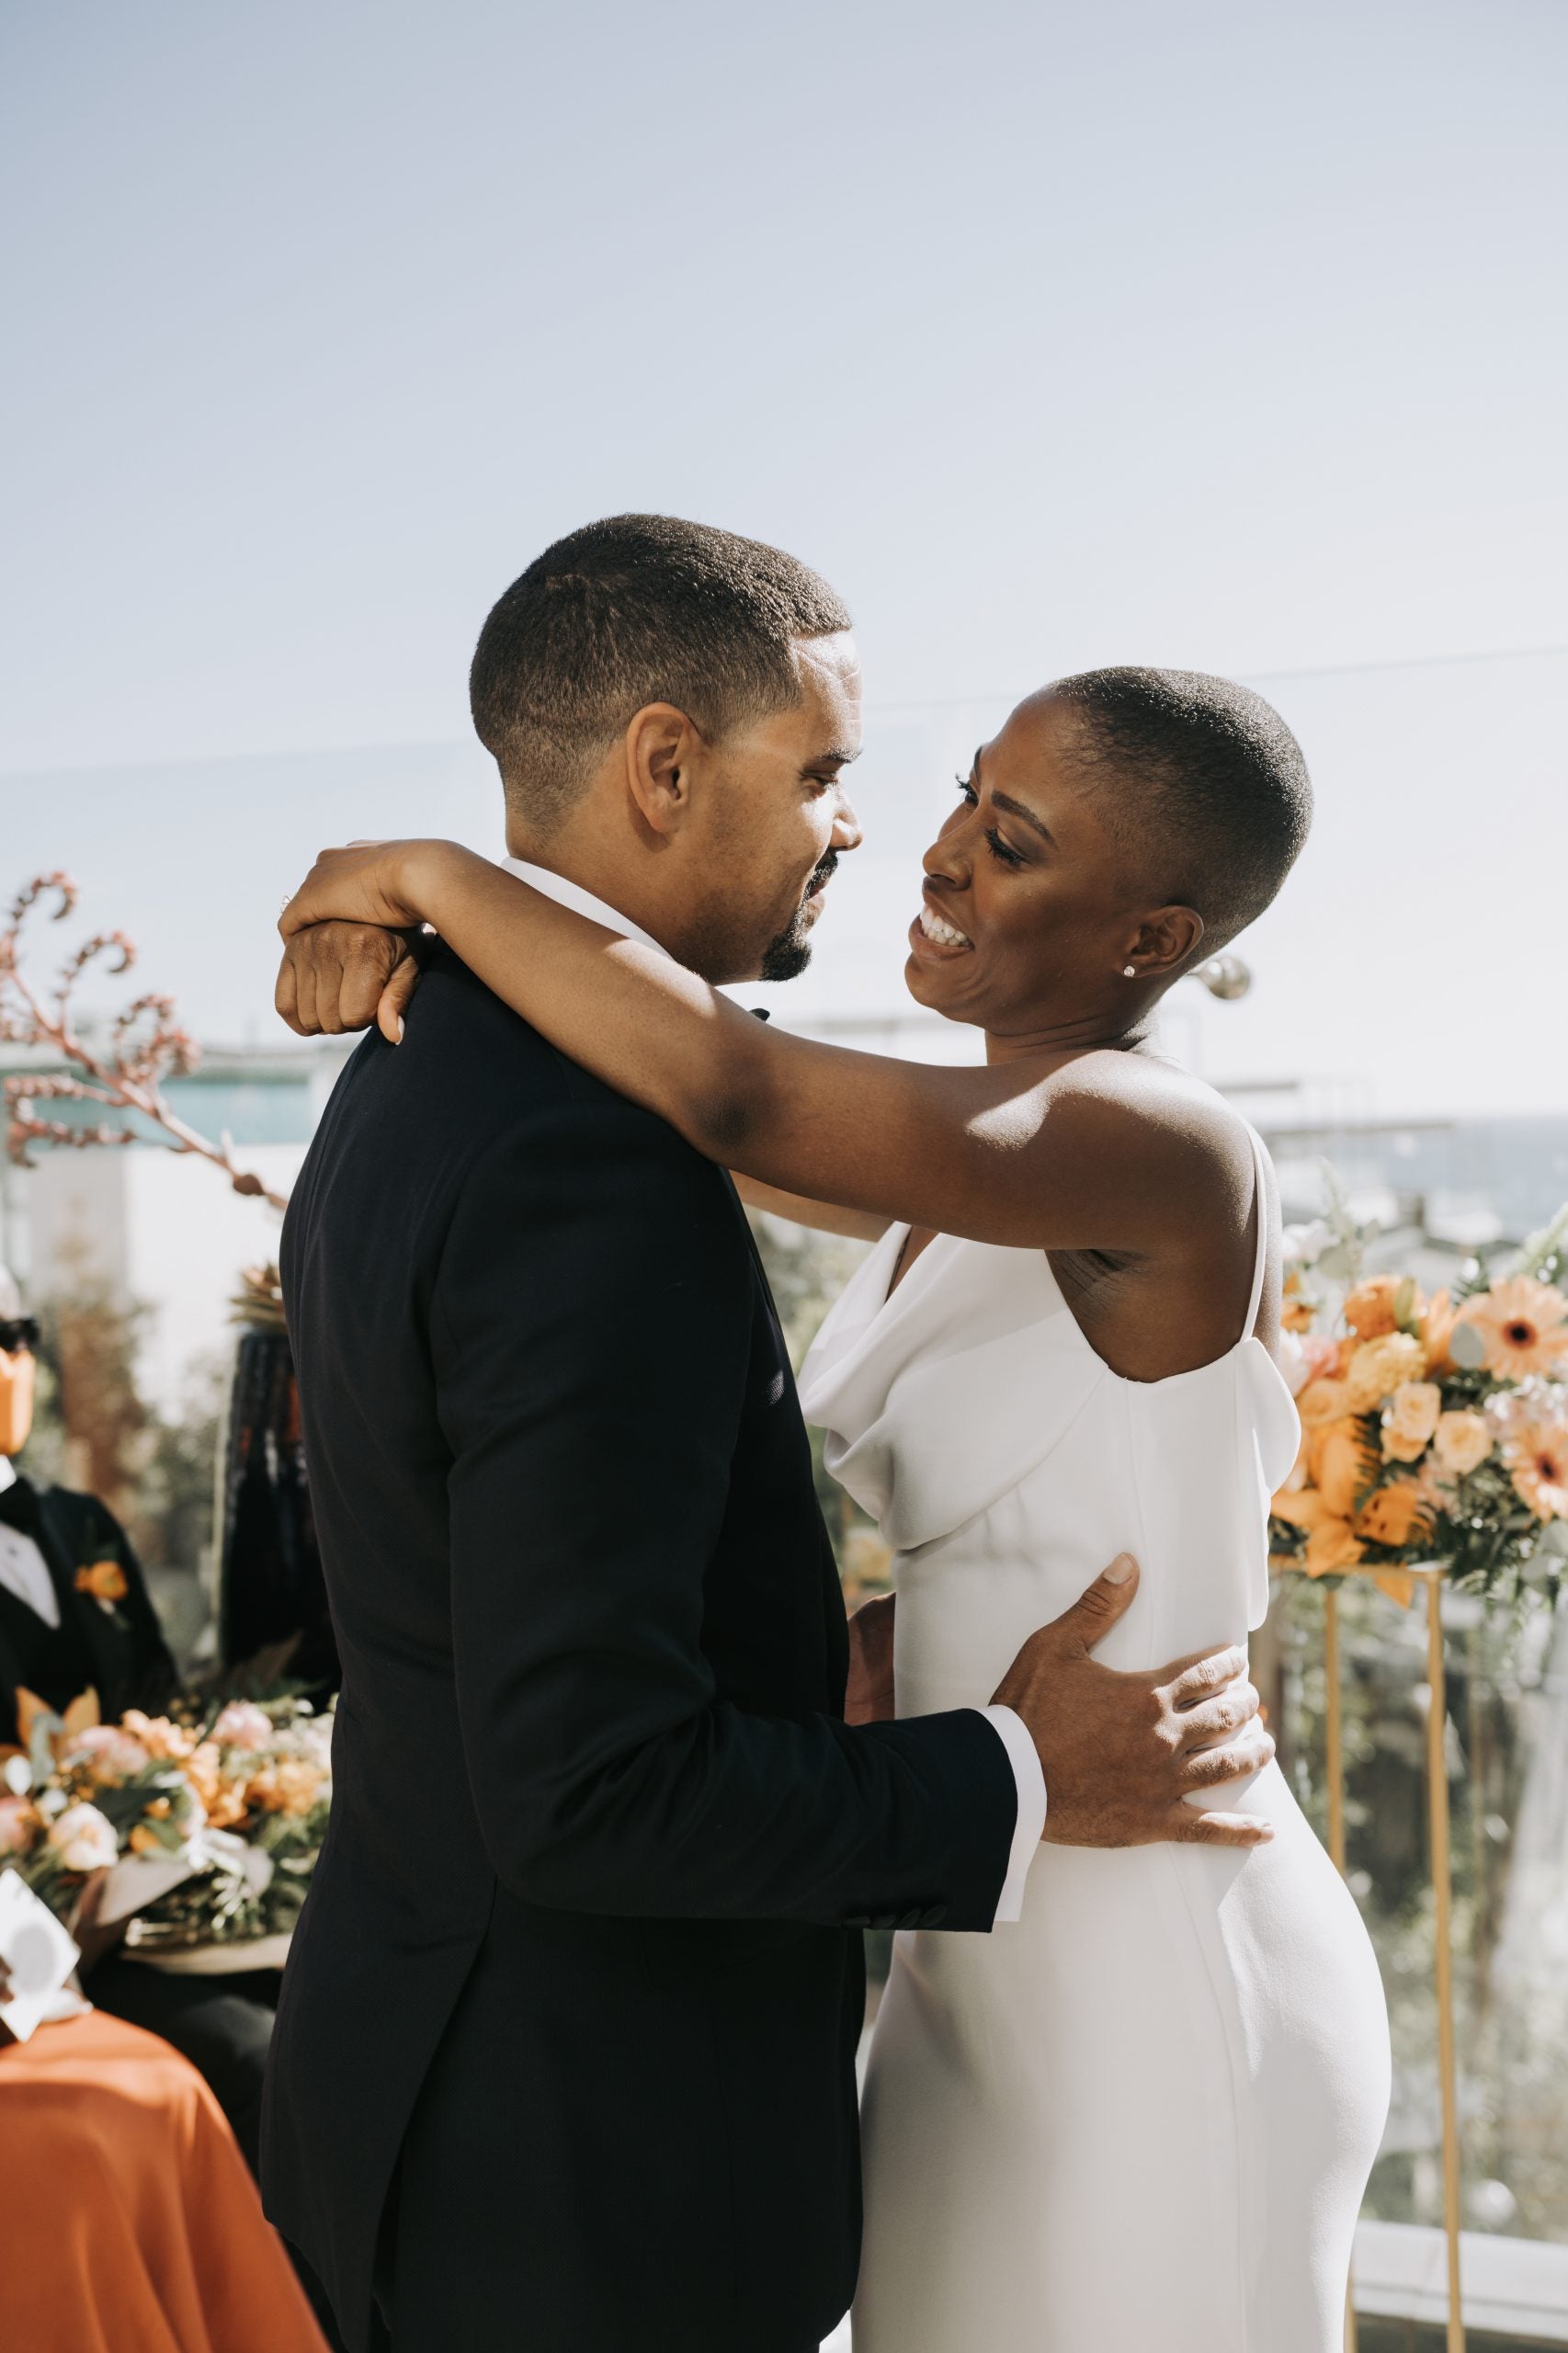 Bridal Bliss: Hello Palm Trees and Ocean Views — See Chelsea And Emerson's Intimate SoCal Wedding